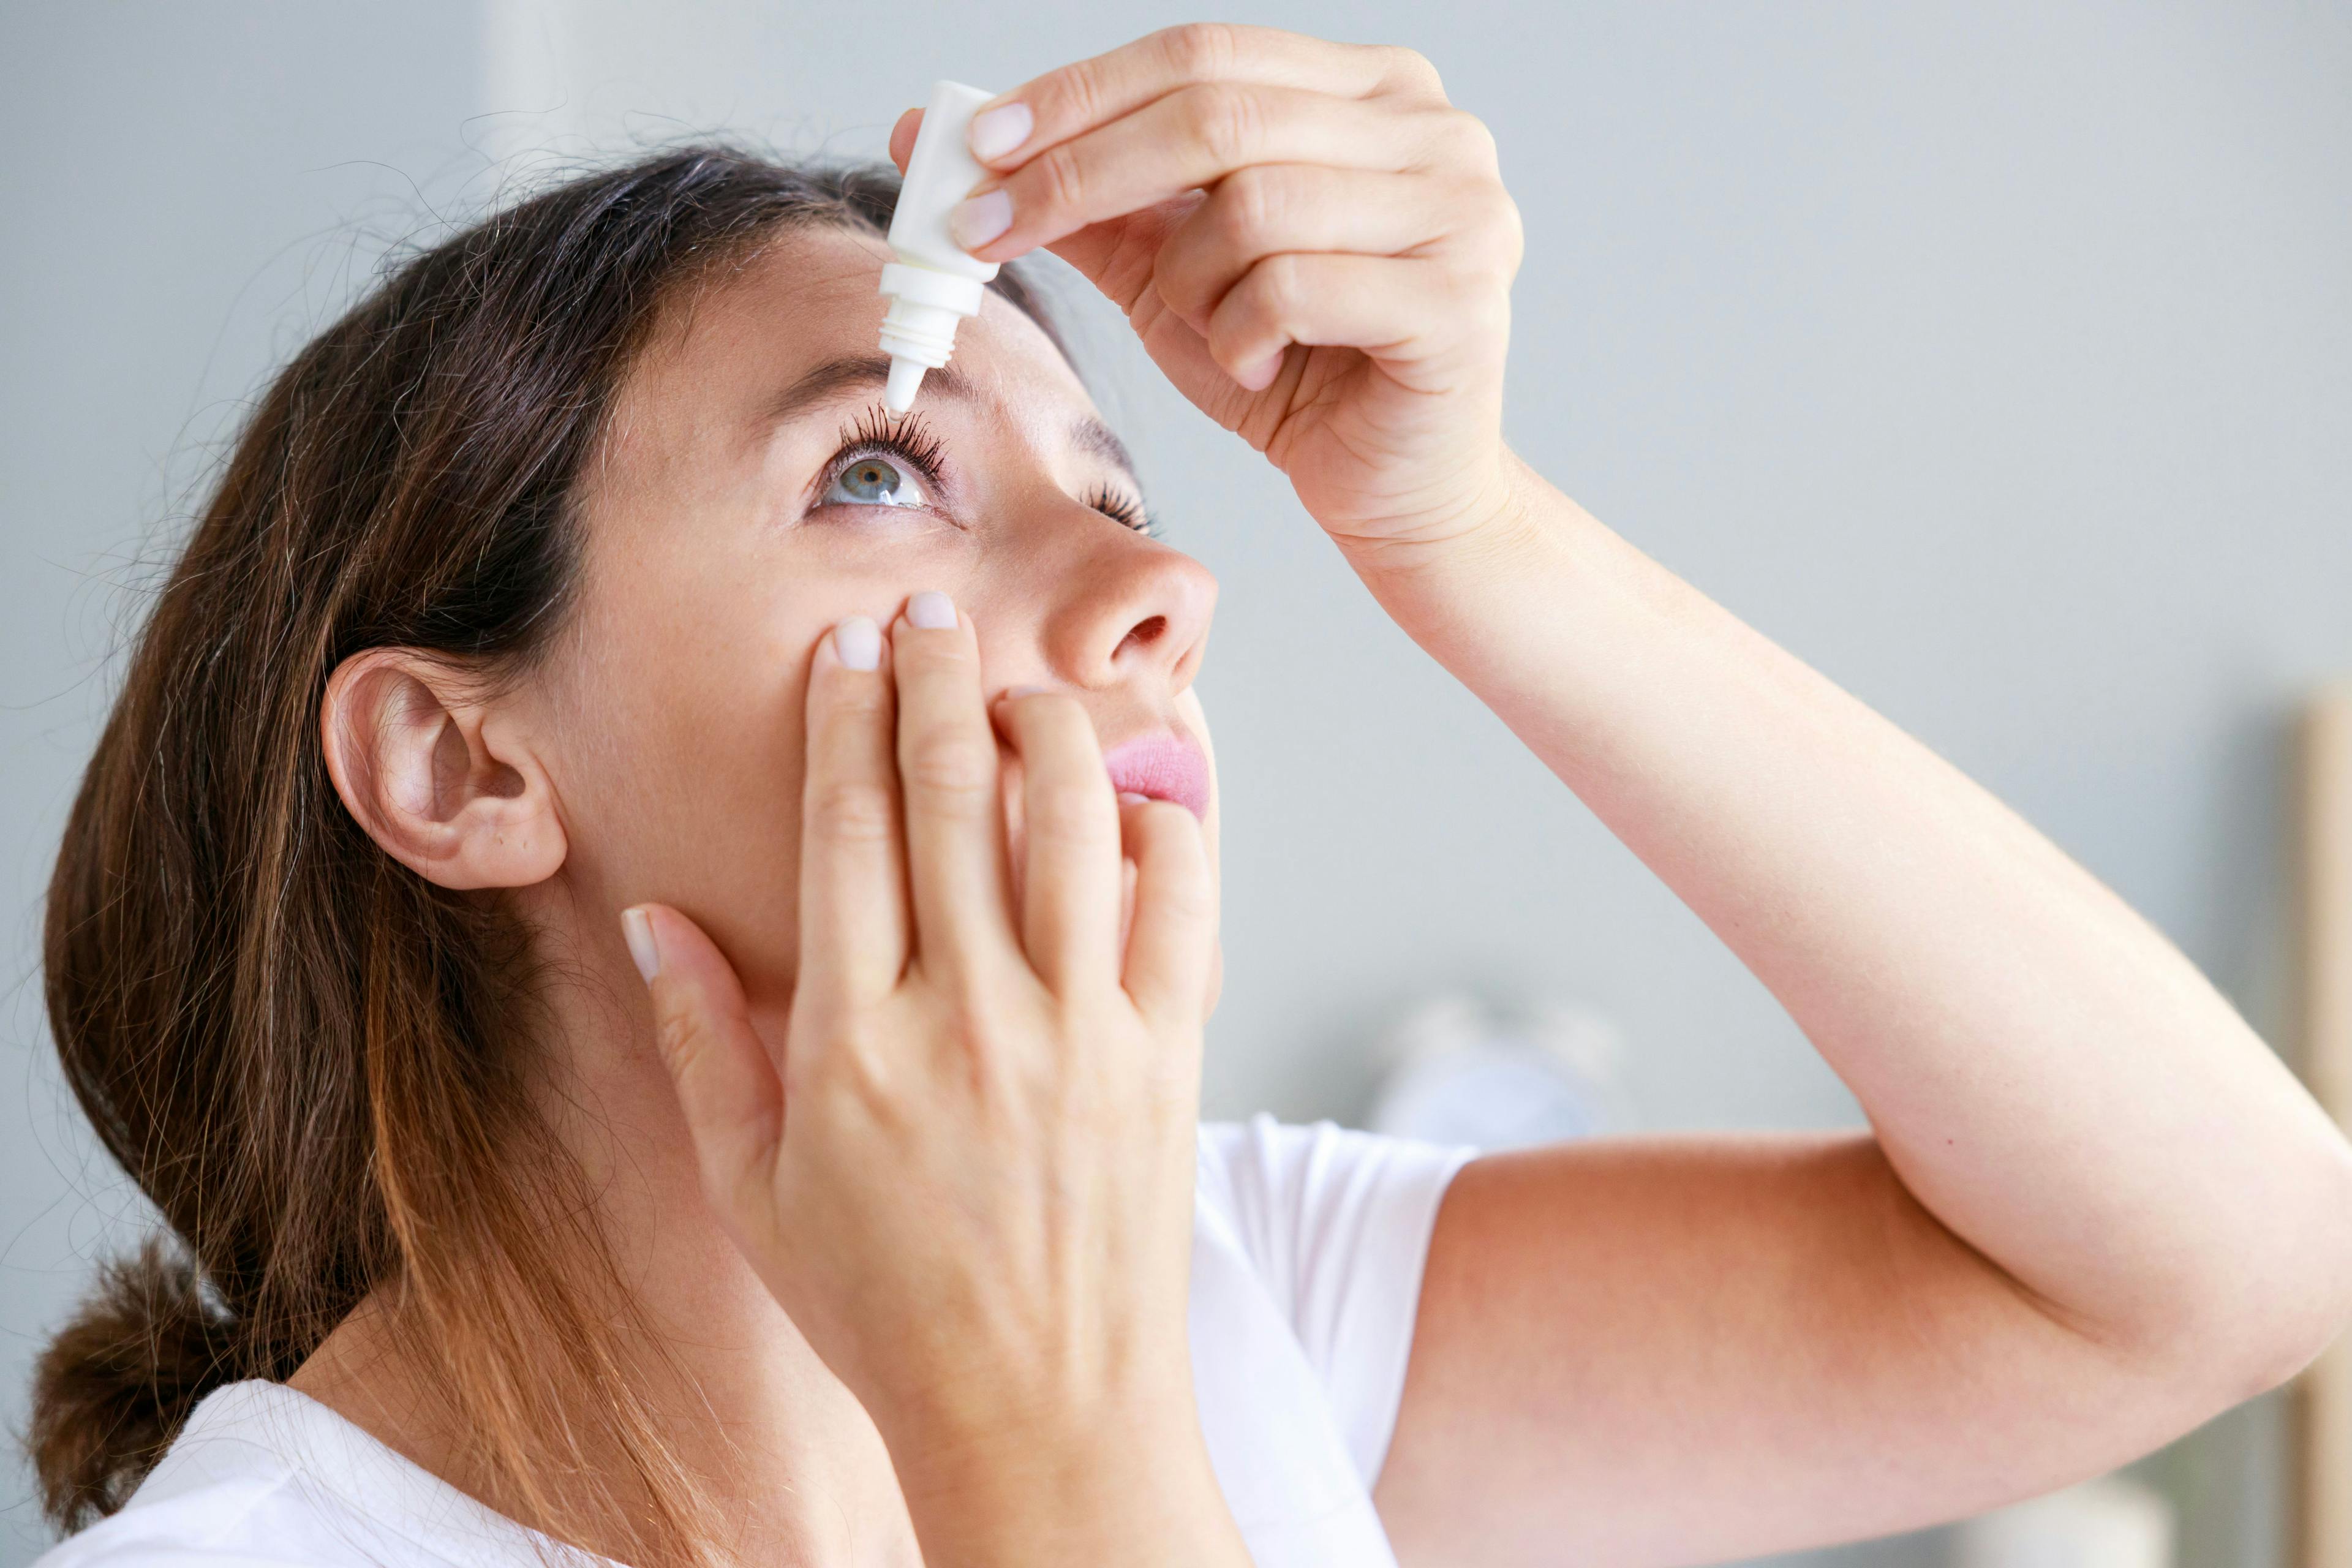 A new survey revealed multiple challenges in living with dry eye disease | Image credit: dragonstock - stock.adobe.com